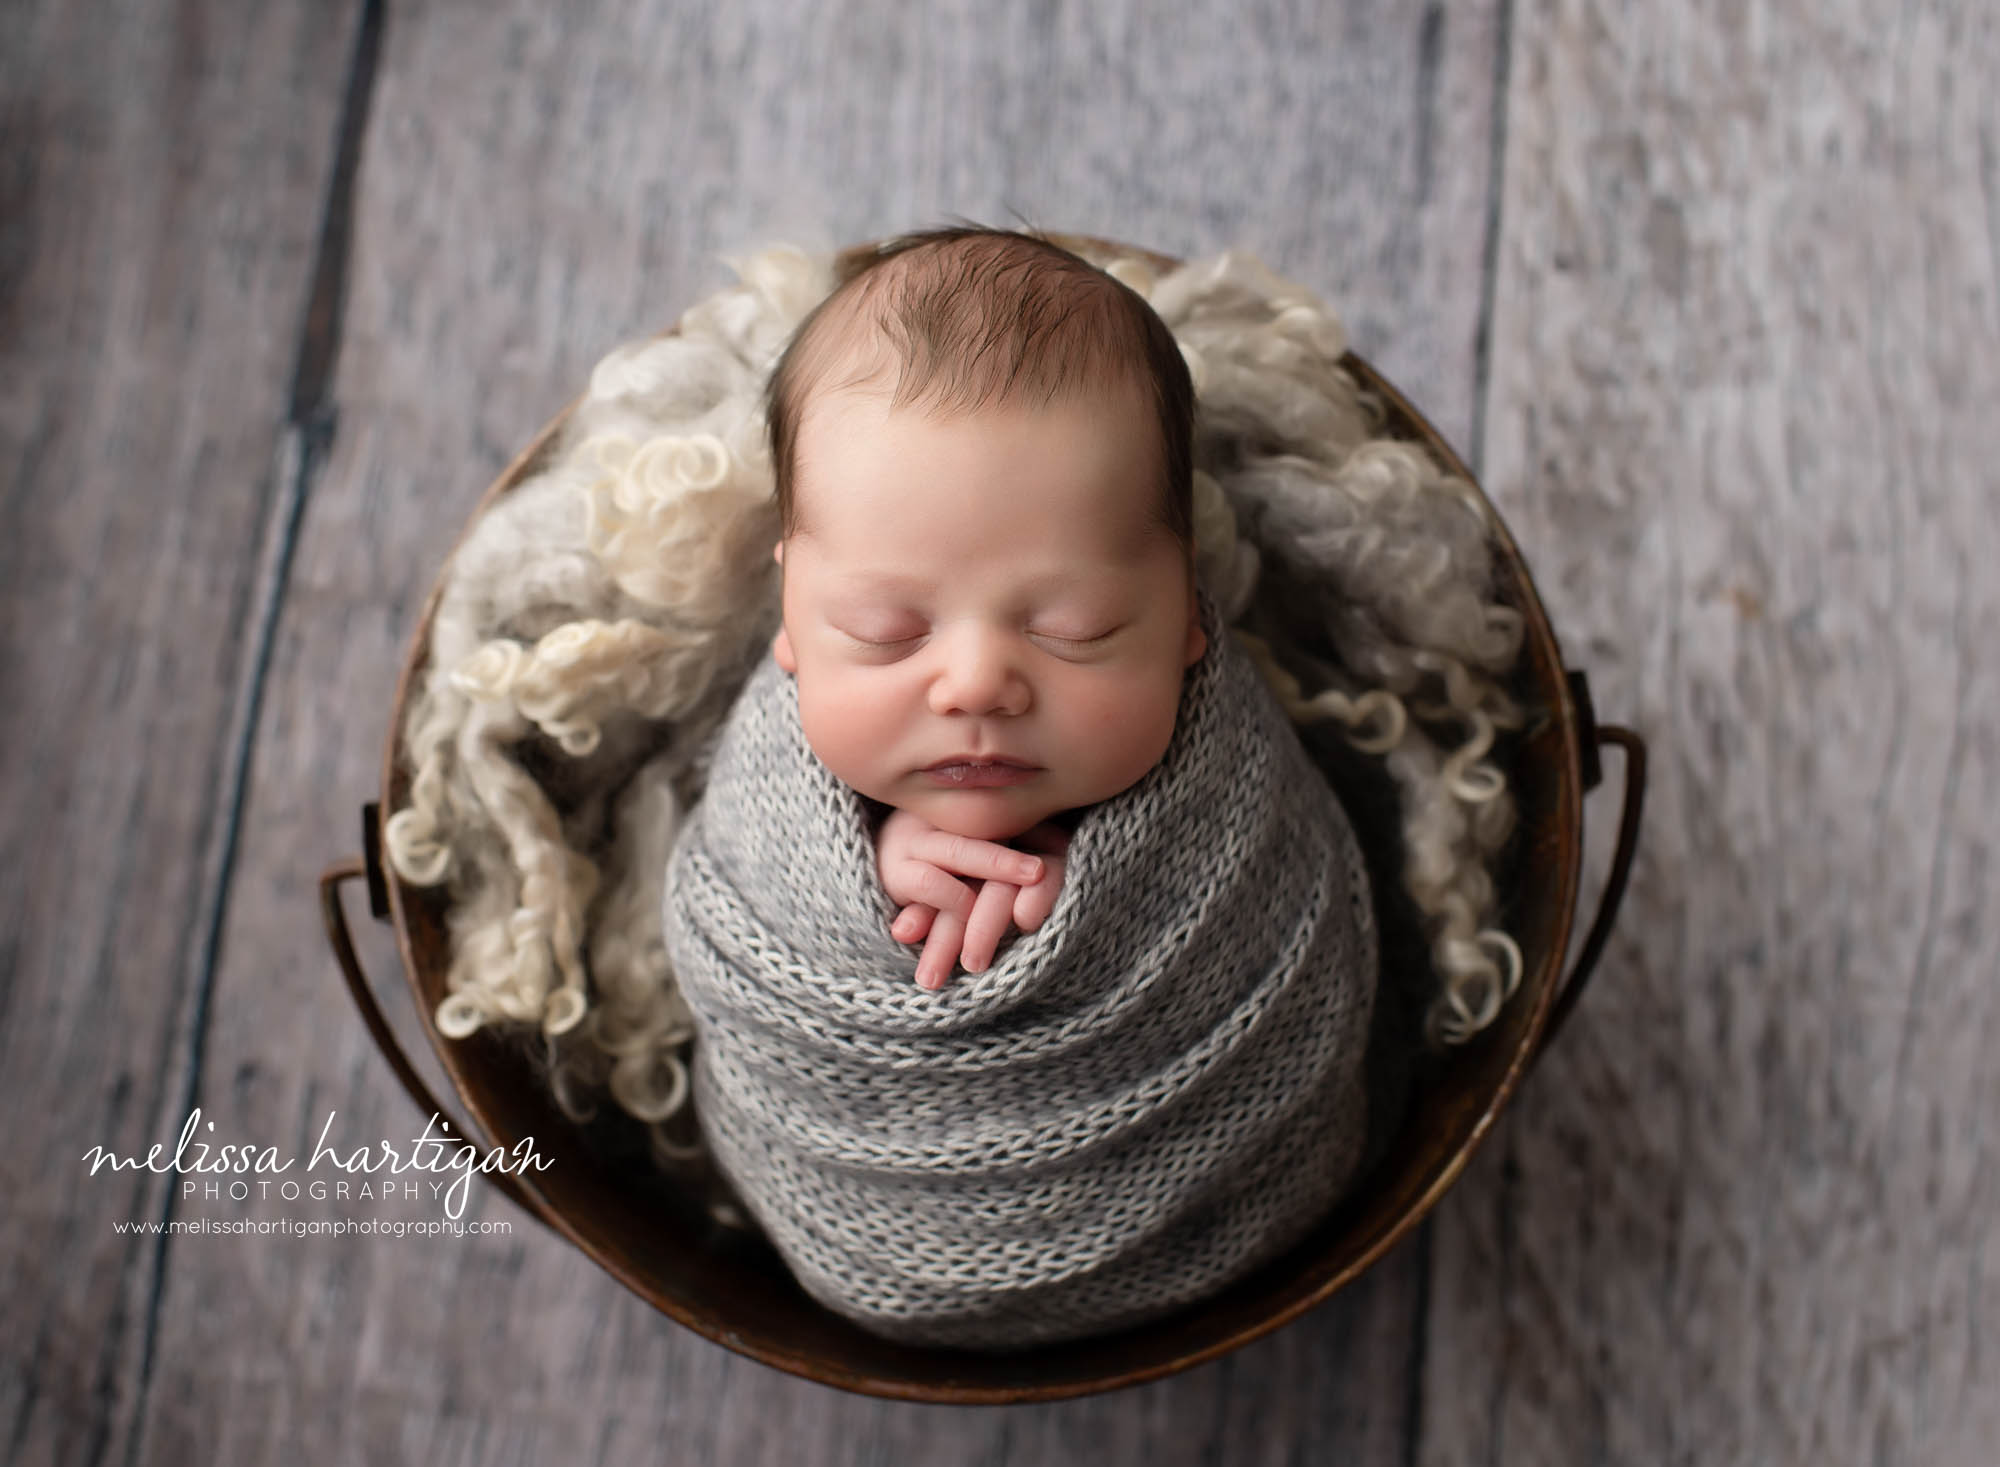 Baby boy wrapped in knitted grey wrap with neutral colored curly layers